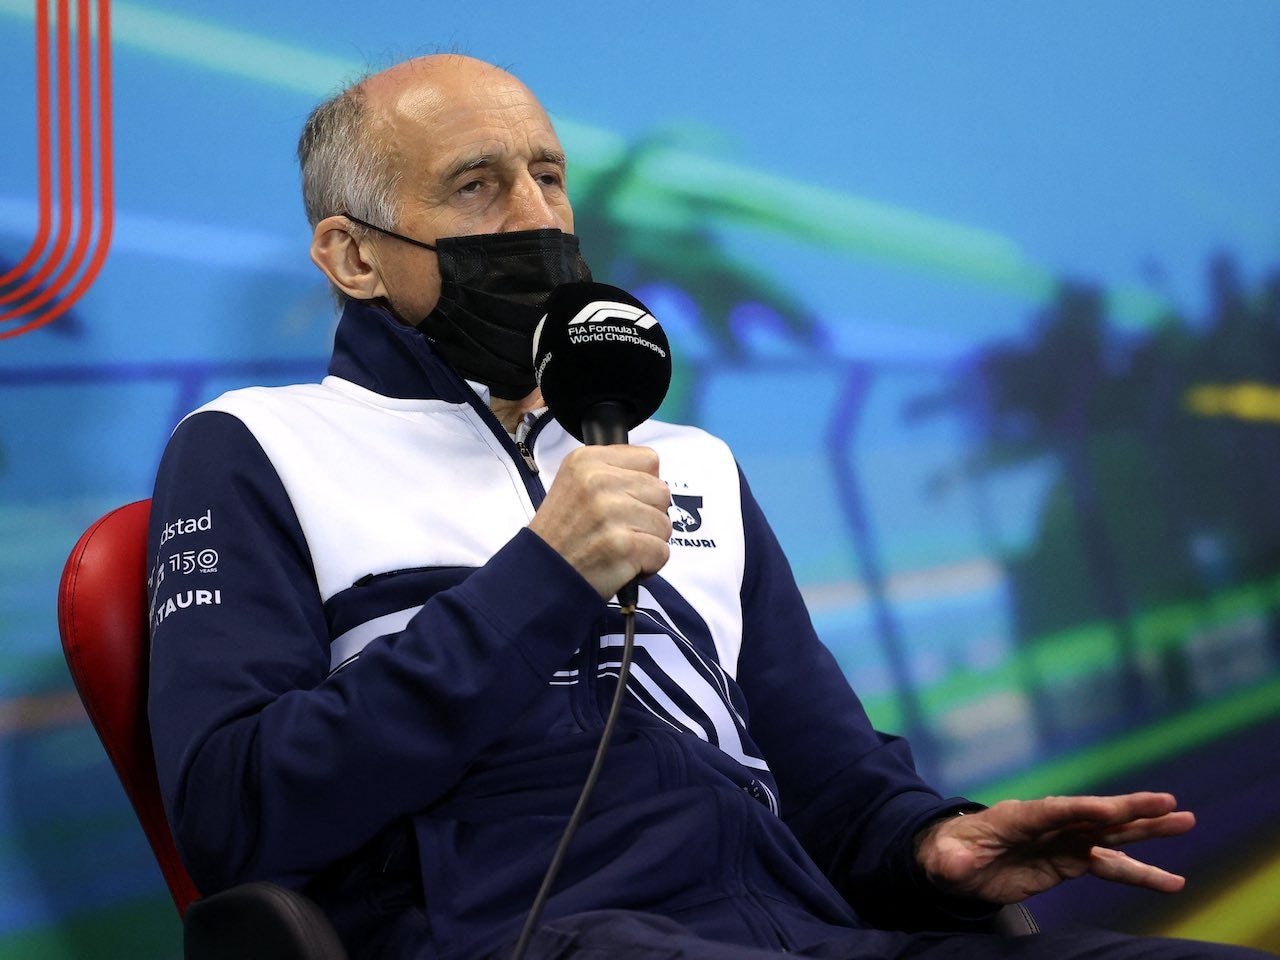 Departure of Franz Tost 'amicable' - Marko